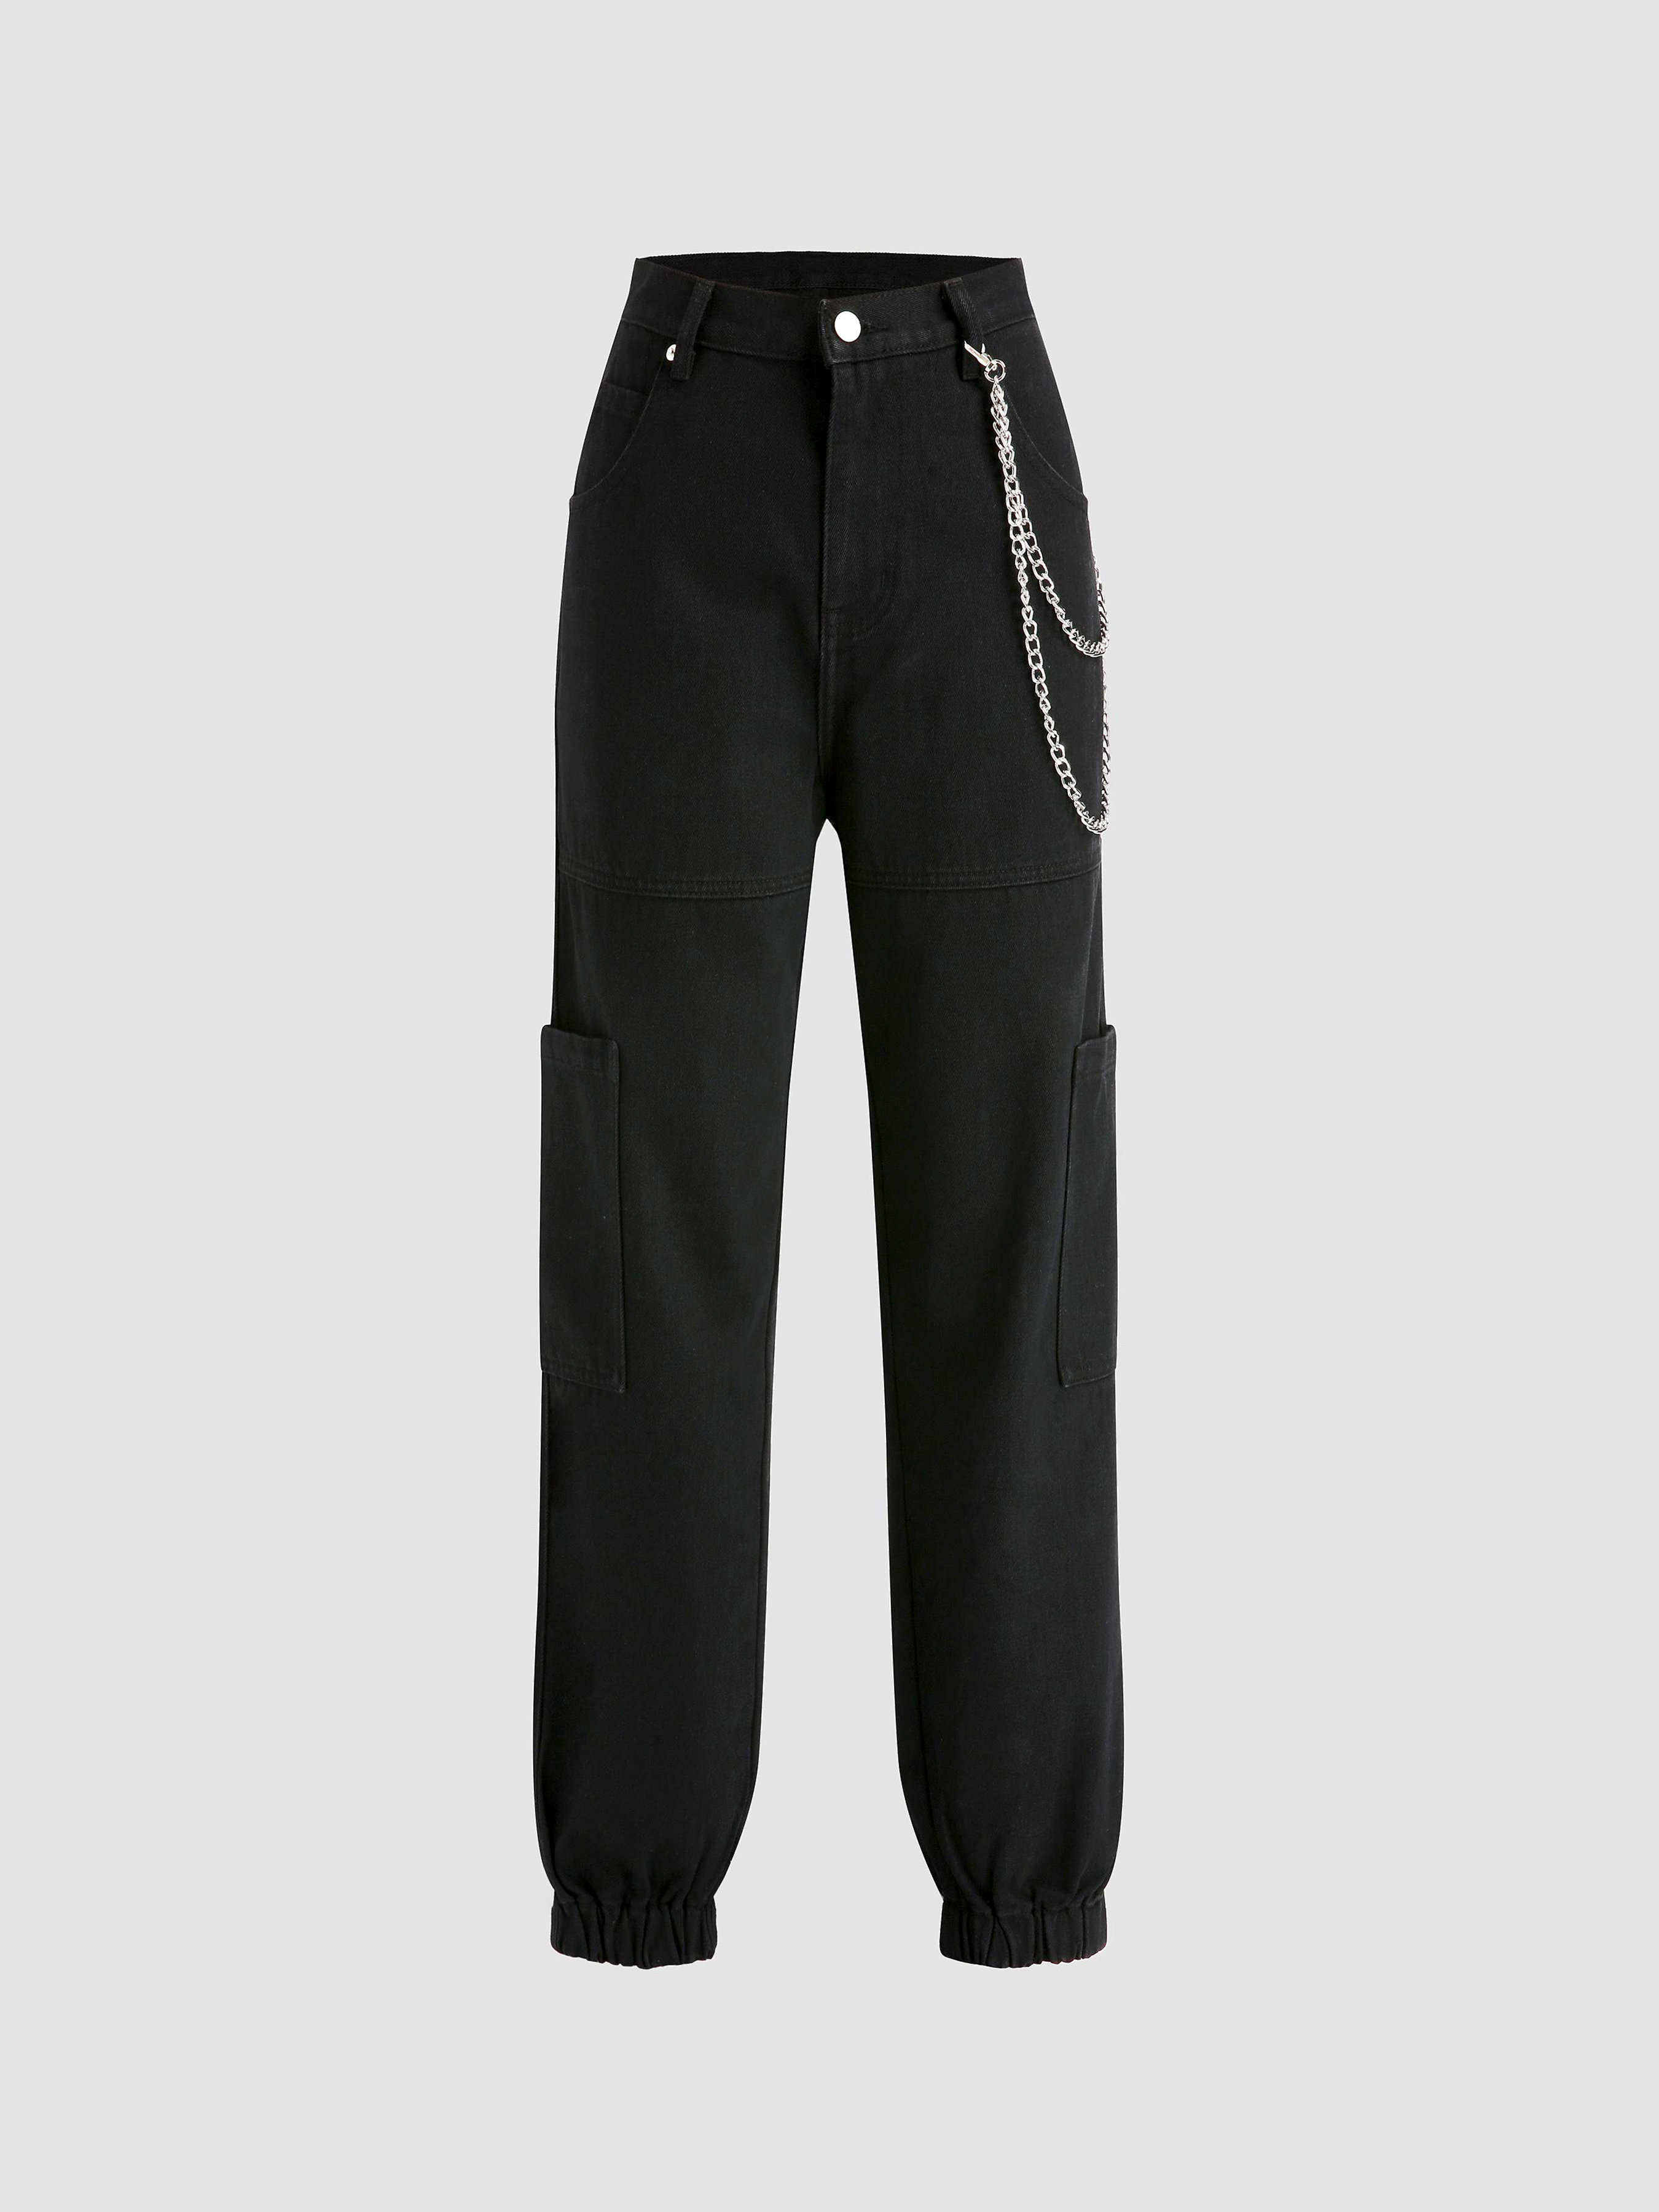 Gothic Bandage Chain Baggy Pants For Women Hip Hop Vintage Cargo Trousers  Women With Punk Style And Casual Streetwear Style From Westlakestore,  $68.69 | DHgate.Com